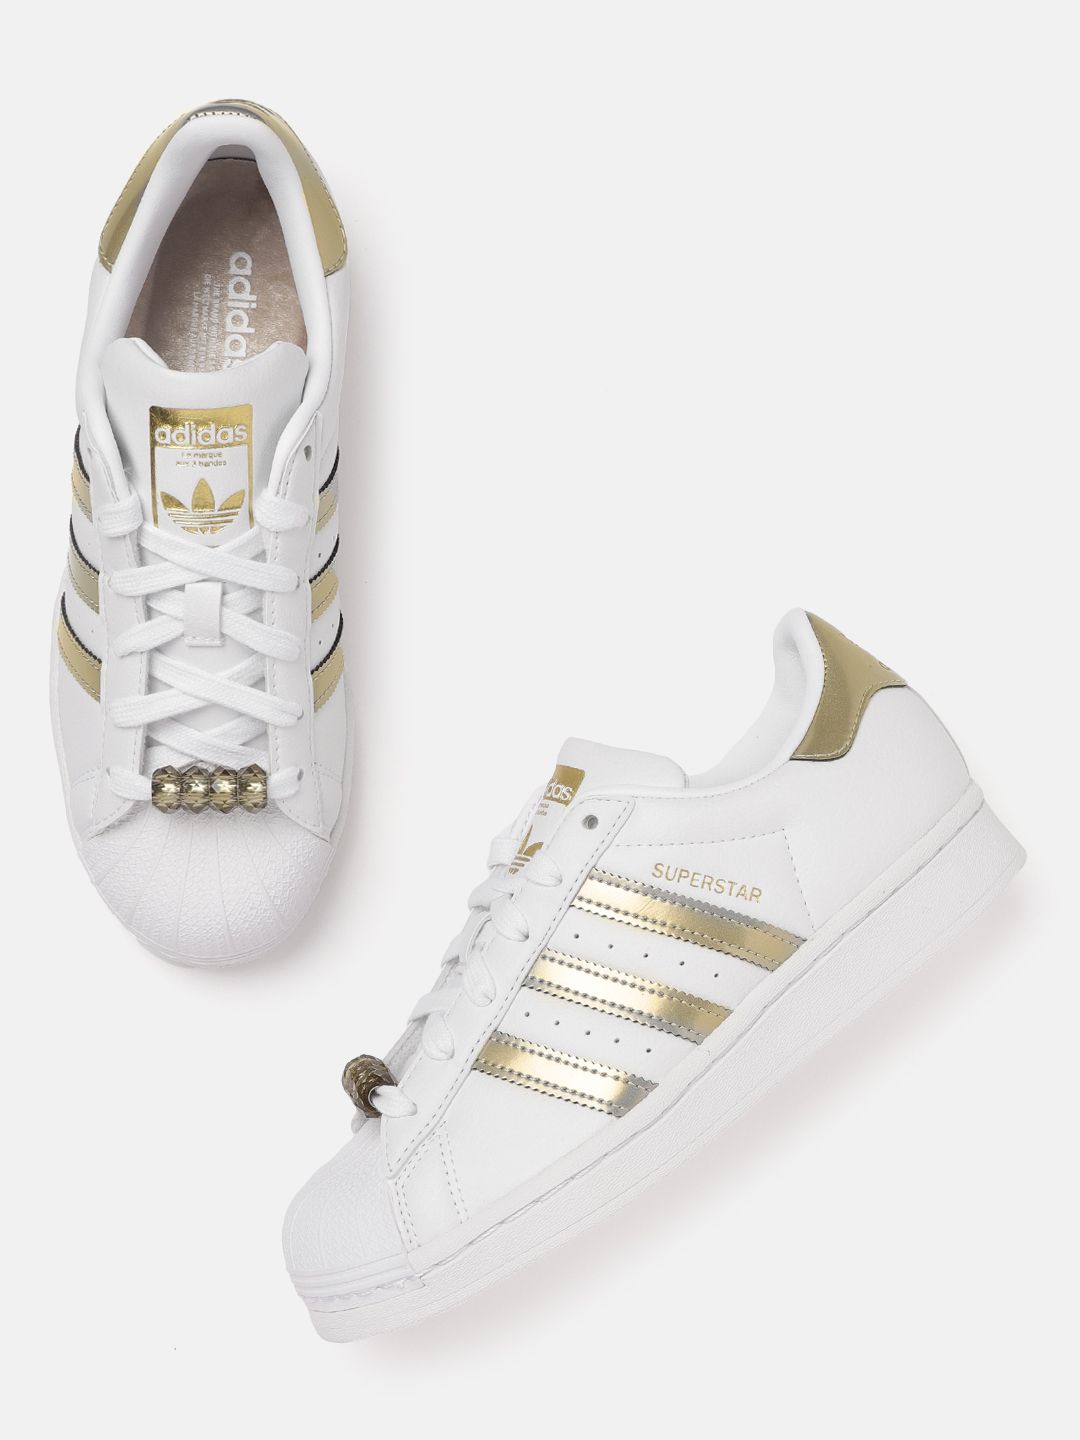 ADIDAS Originals Women White & Silver-Toned Beads Embellished Perforated Superstar Sneaker Price in India